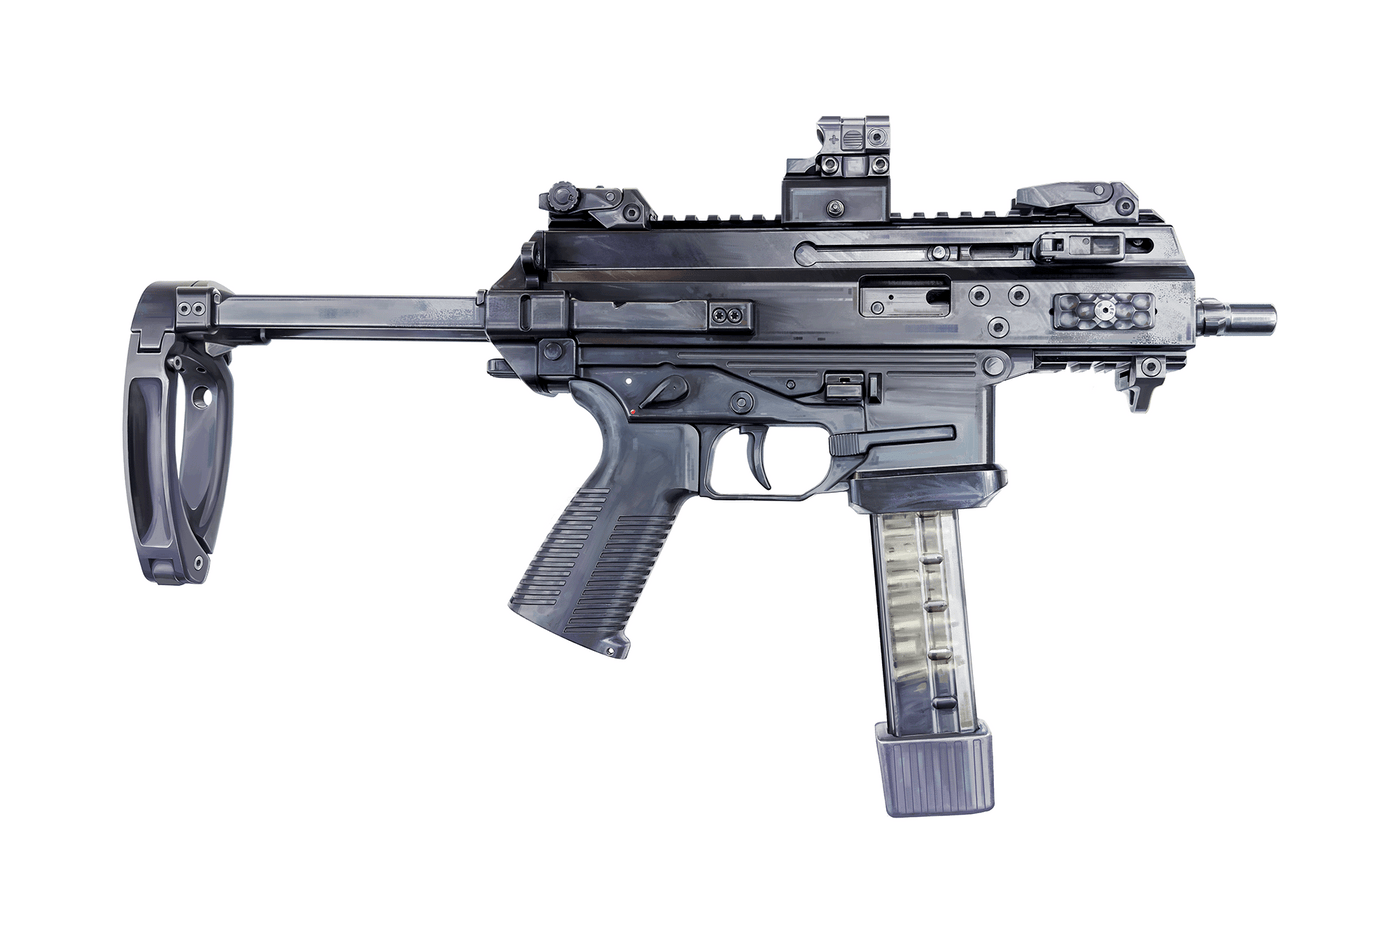 Elite Forces 9mm Carbine Painting - Just The Piece